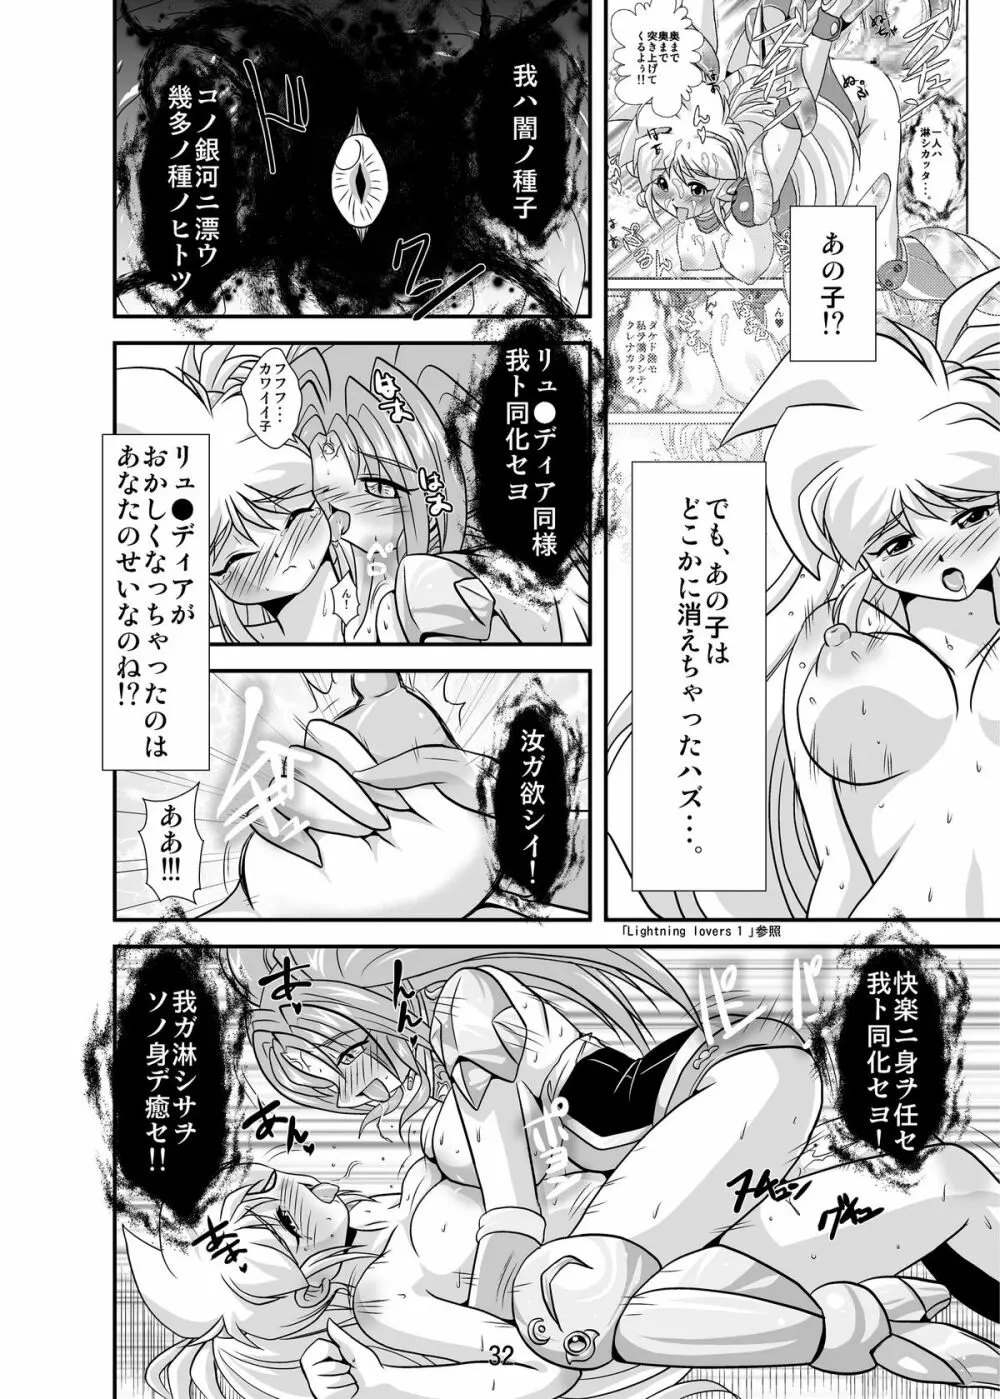 Lightning lovers 4 Page.32